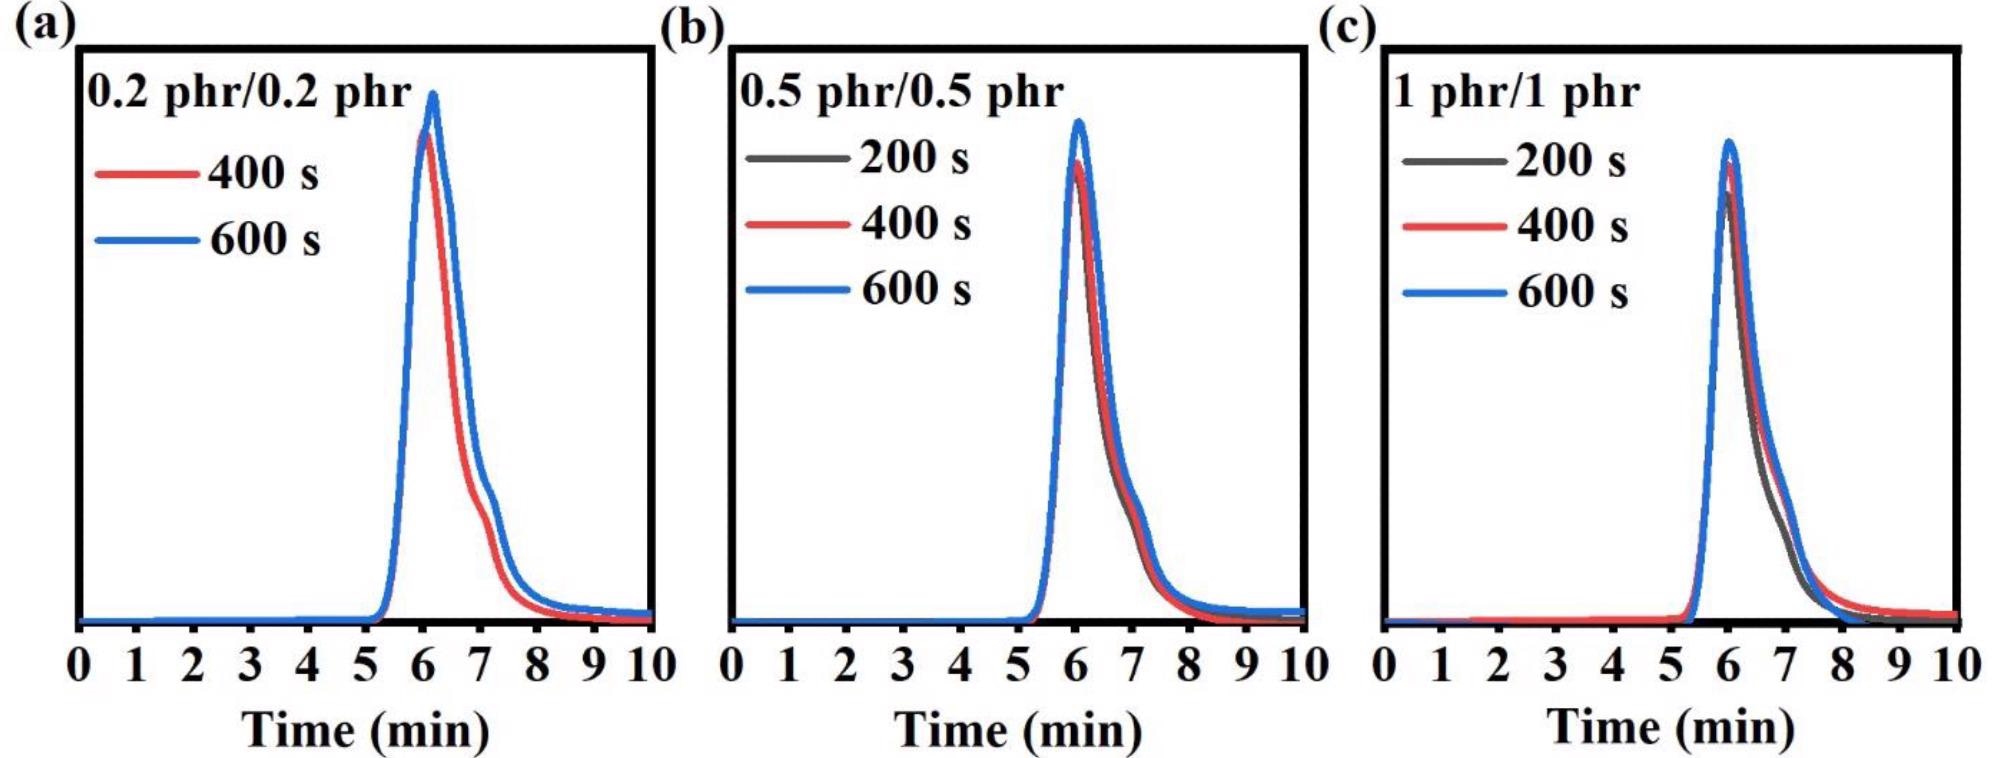 GPC spectra of PTBA prepared with different loadings of CQ/EDB: (a) 0.2 phr/0.2 phr; (b) 0.5 phr/0.5 phr; (c) 1 phr/1 phr, under the household LED panel light irradiation for different times.